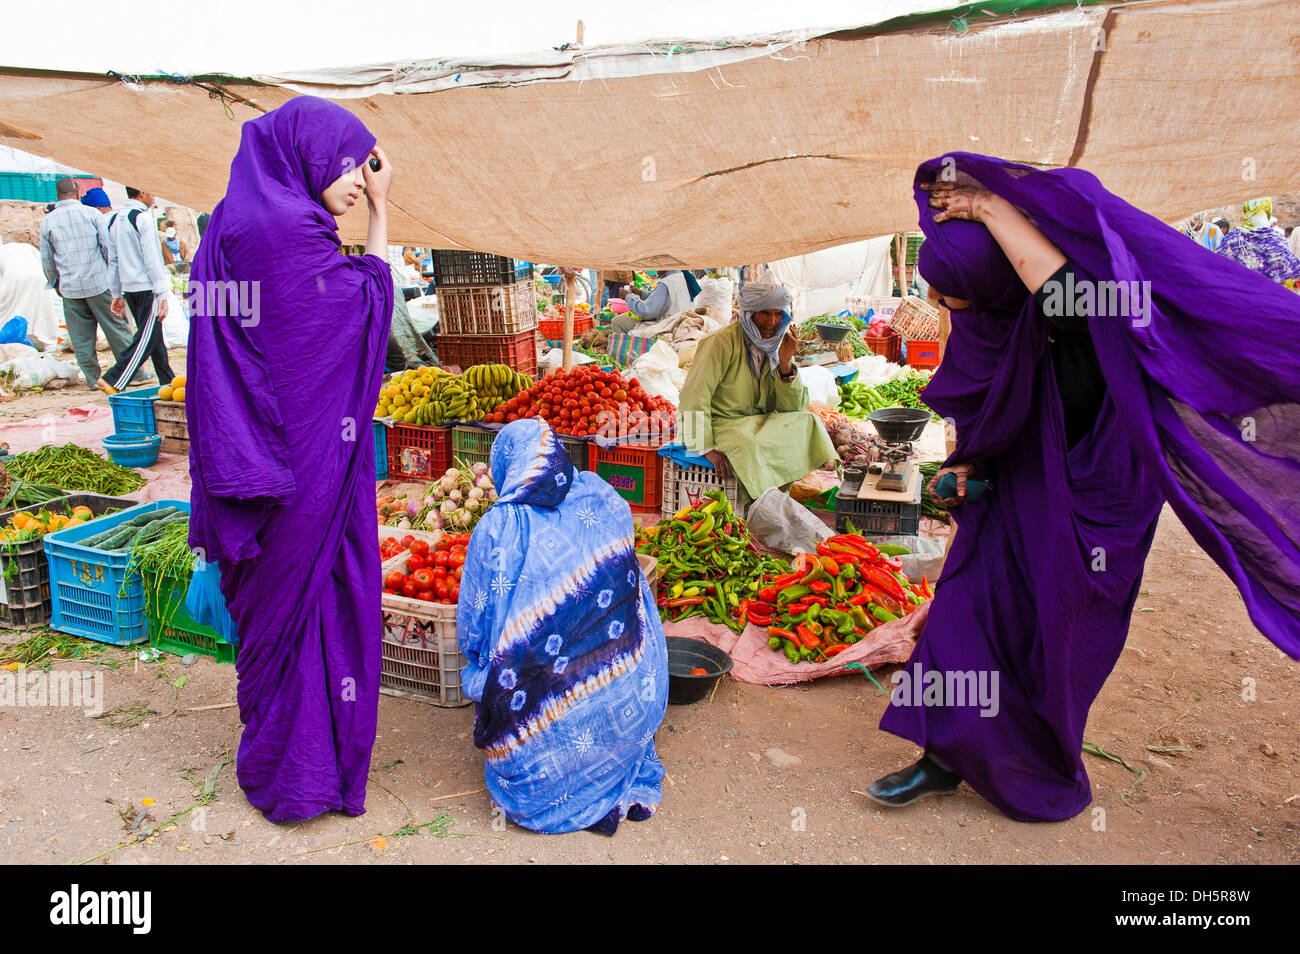 Three Berber women in front of a greengrocer's stall in the souks or bazaar area, Draa Vally, southern Morocco, Morocco, Africa Stock Photo